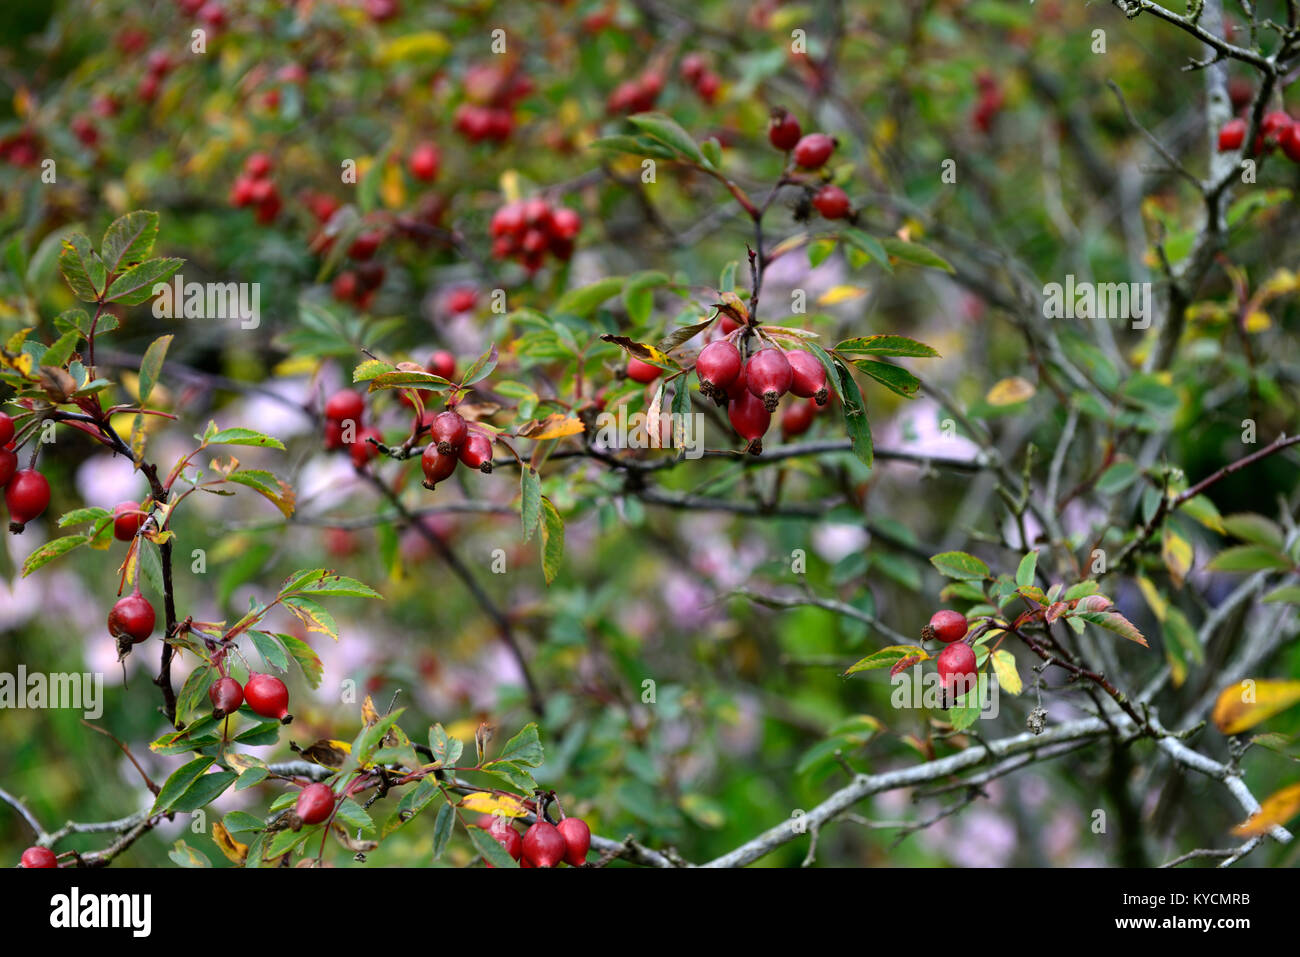 rose hip, rose hips,rose haw, rose hep,rosehips,accessory fruit,red,bright red,fruit,fruits,fruiting body,red,pollinated flower,pollinated flowers,gar Stock Photo